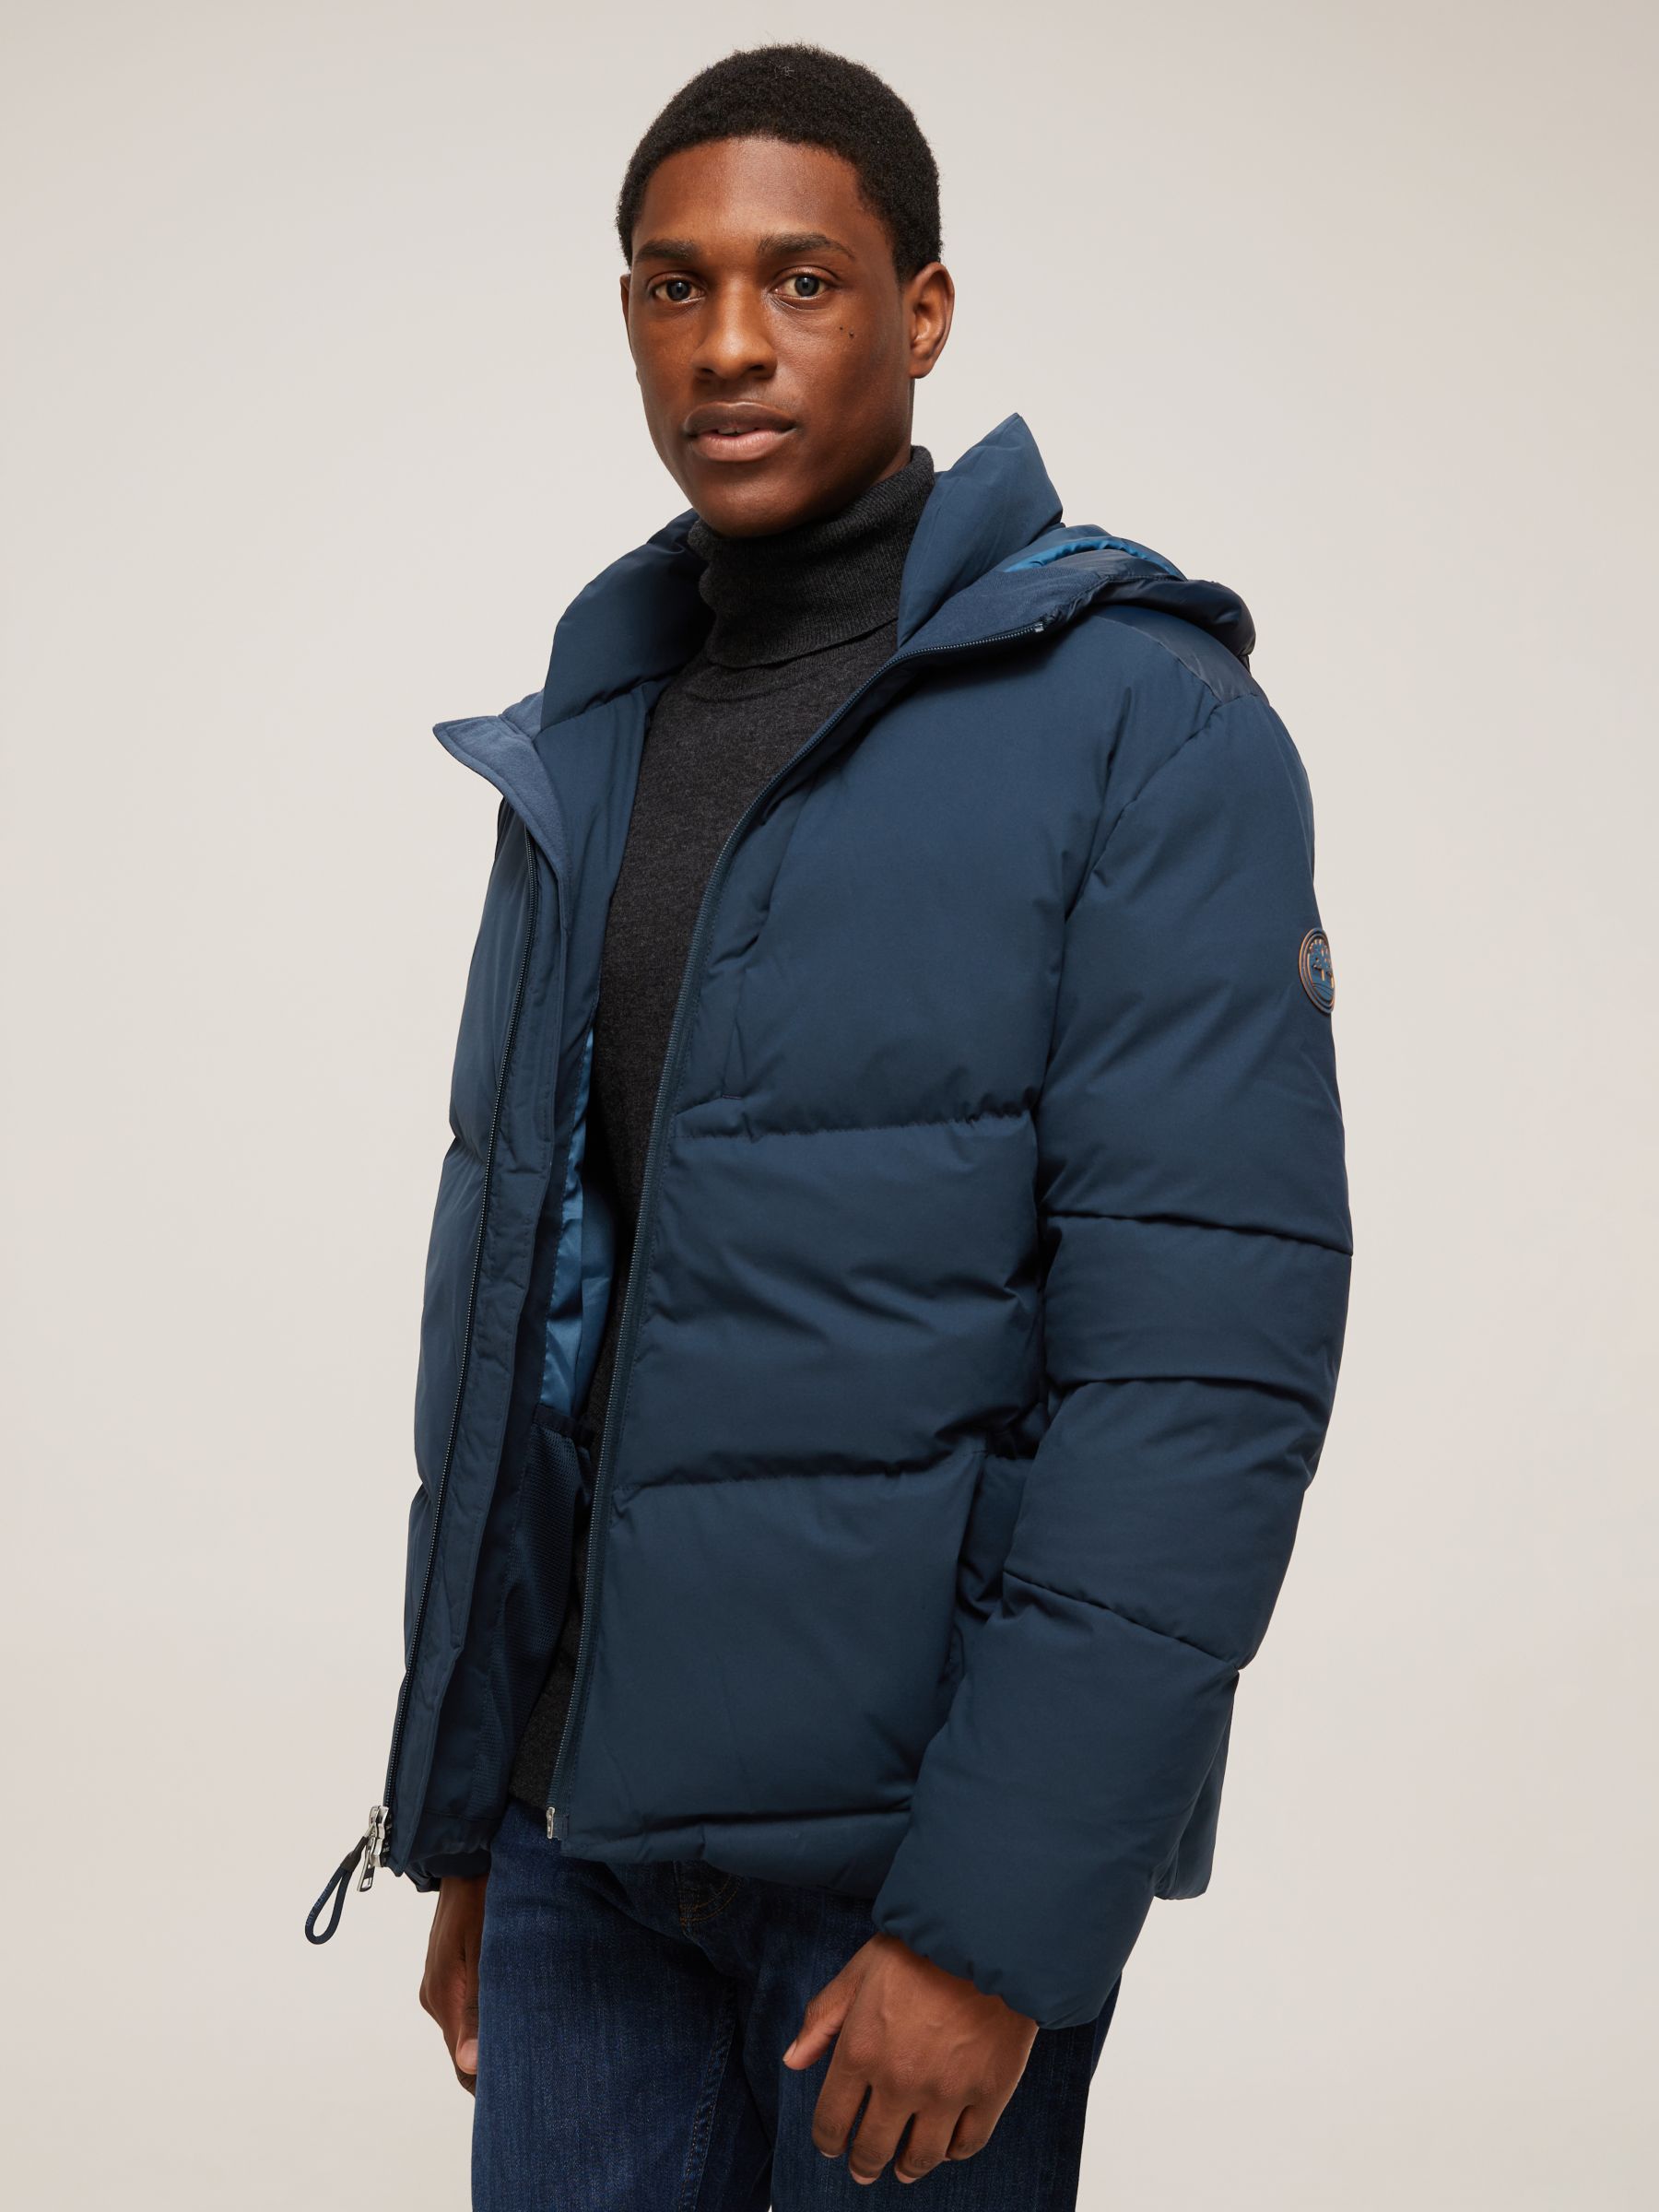 Timberland Quilted Jacket, Dark Sapphire at John Lewis & Partners